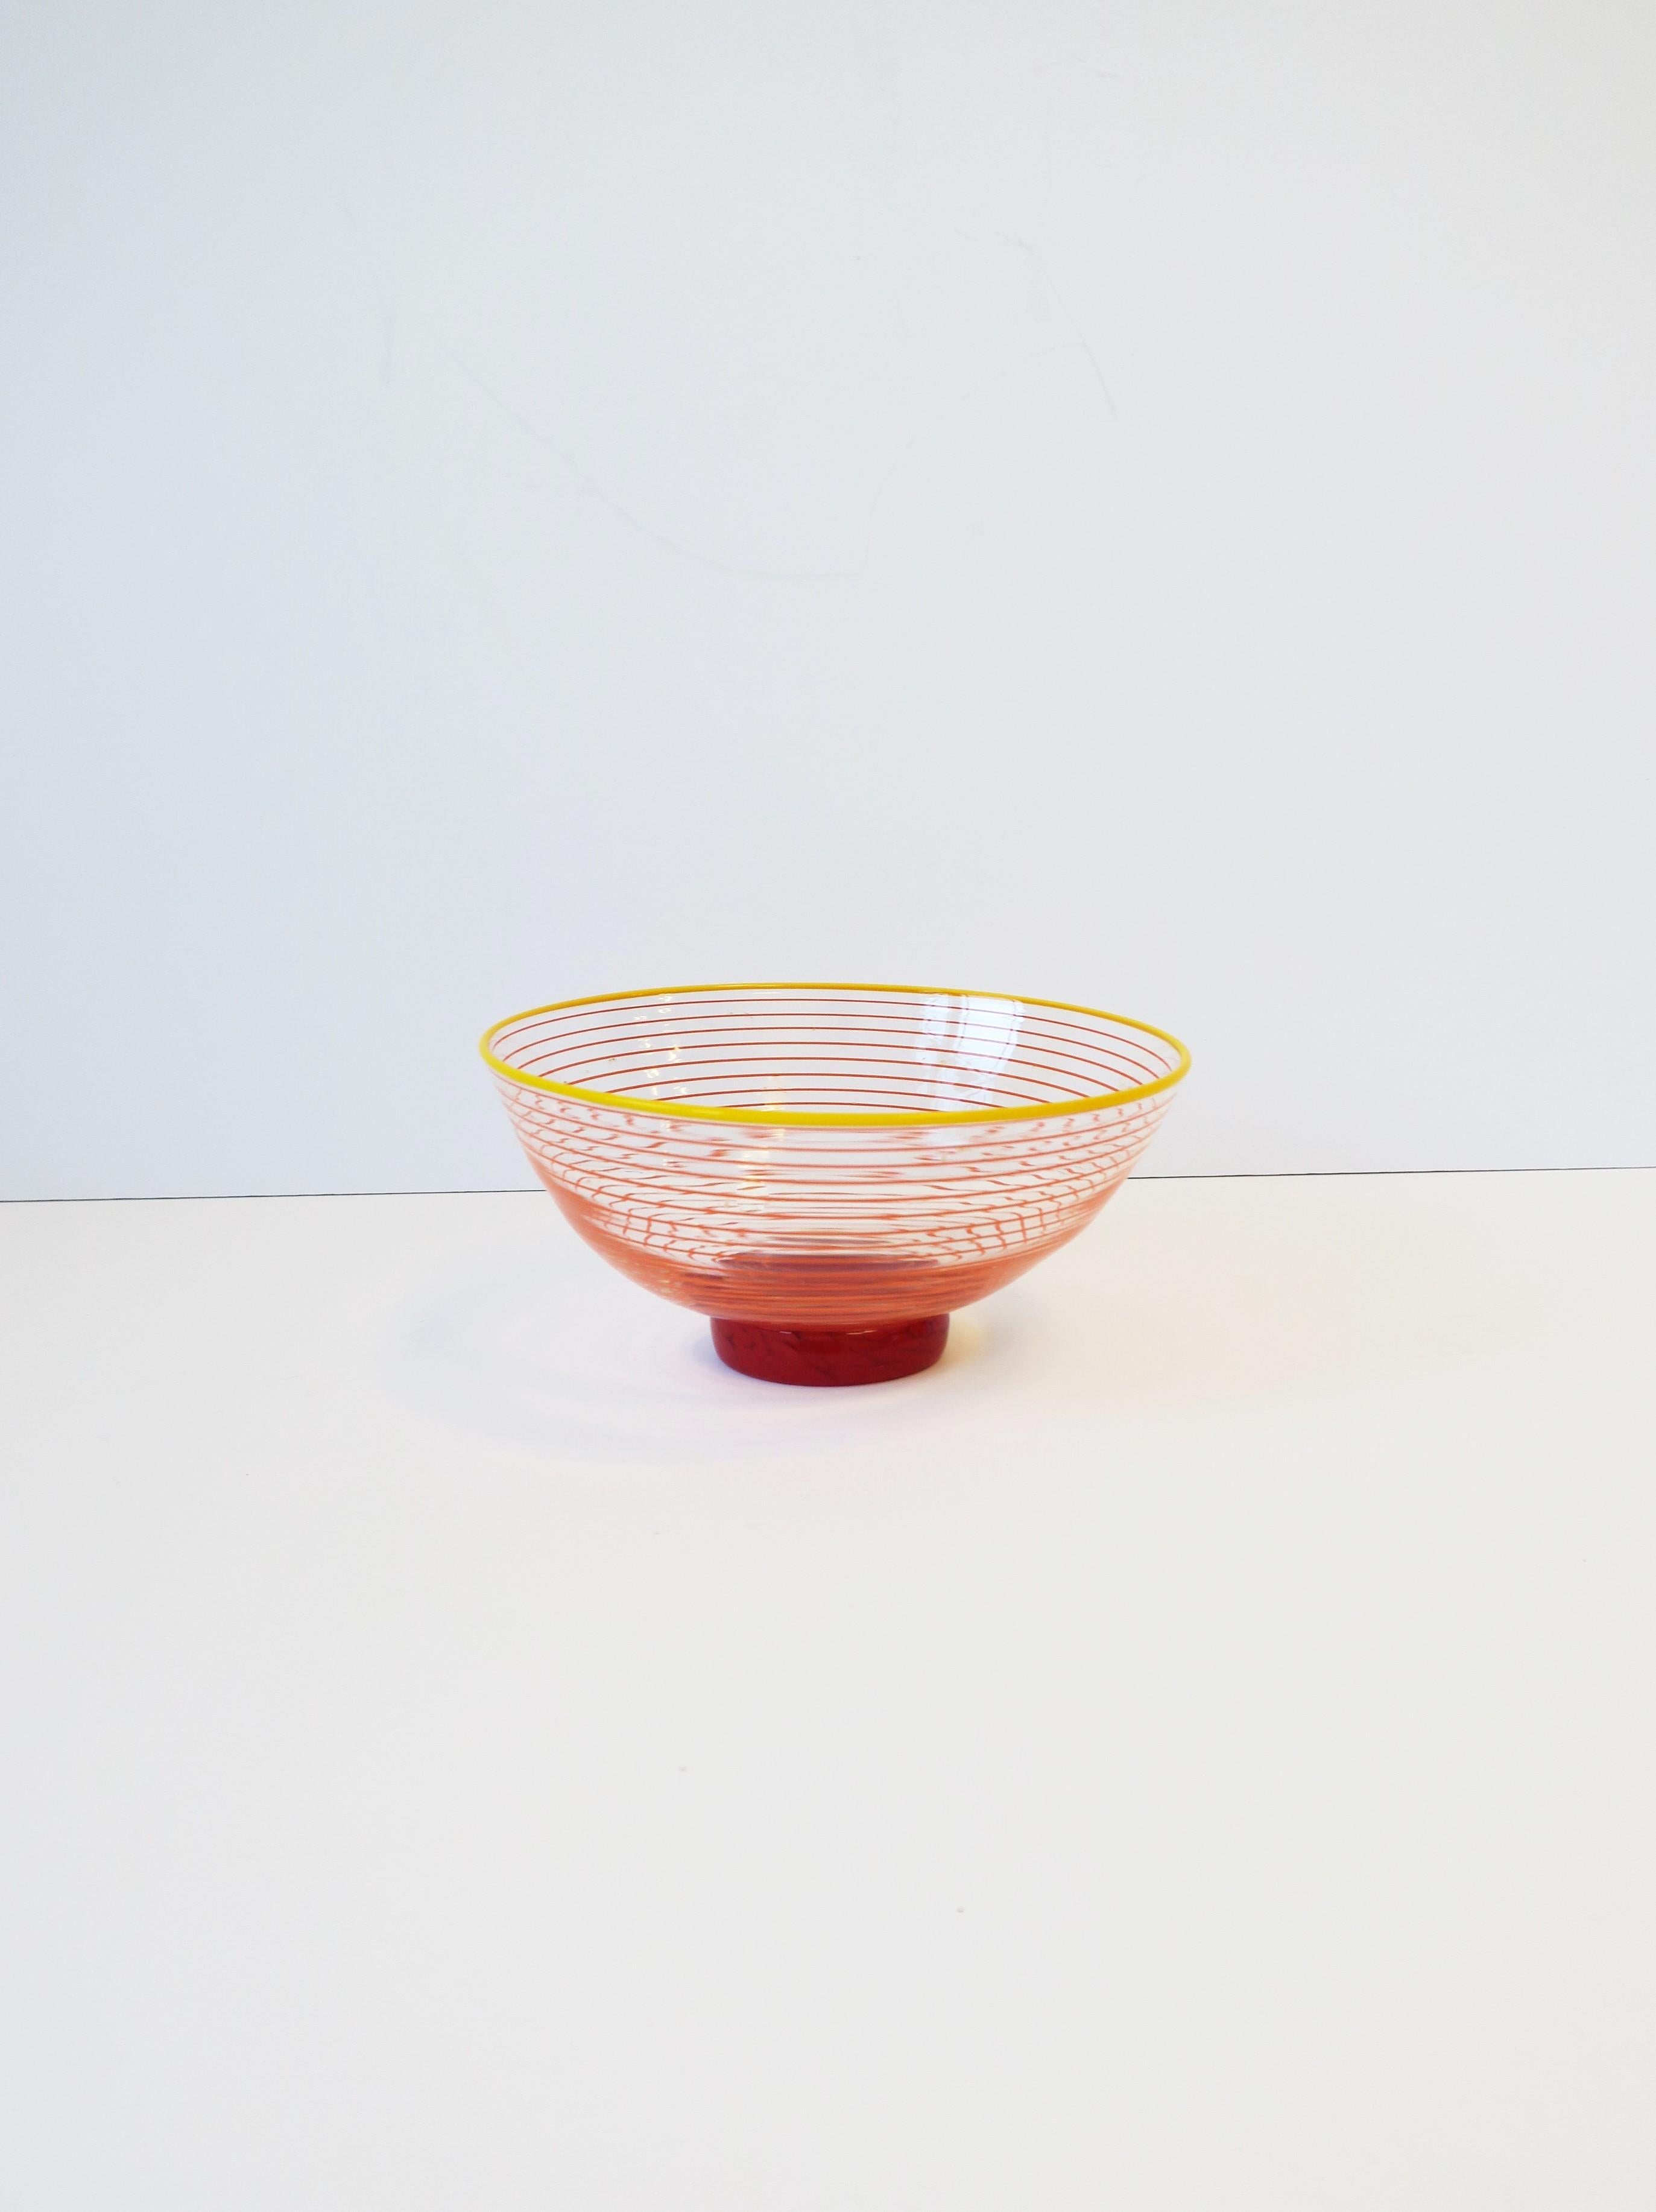 A beautiful signed Post-Modern period red art glass bowl, circa late-20th century. A very beautiful clear/transparent, red, orange and yellow art glass bowl with artist signature on bottom, please see images #11 and 12. Bowl is hand-crafted in